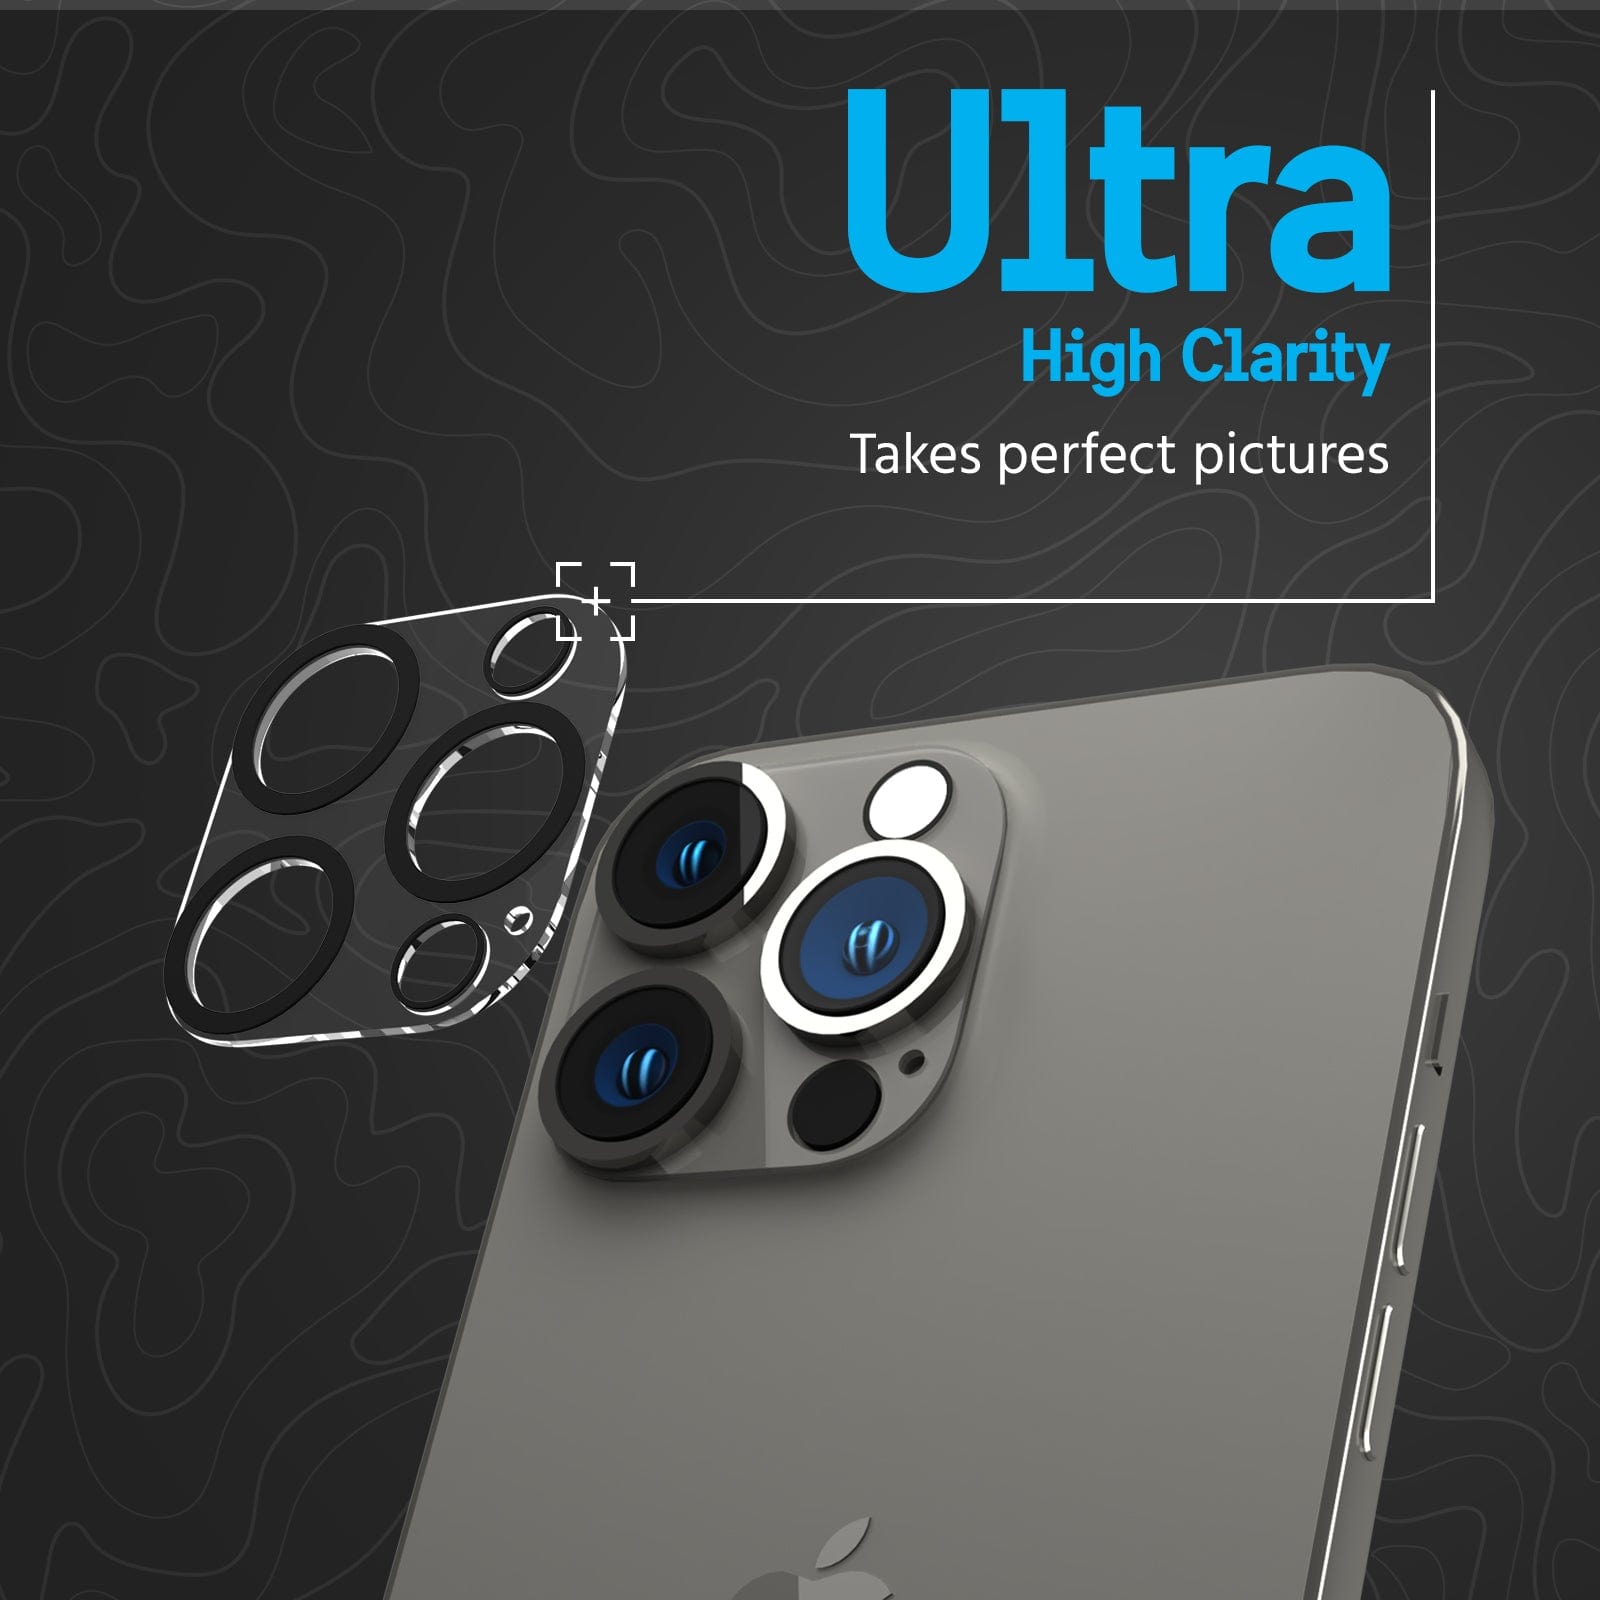 Ultra High Clarity Takes perfect pictures.